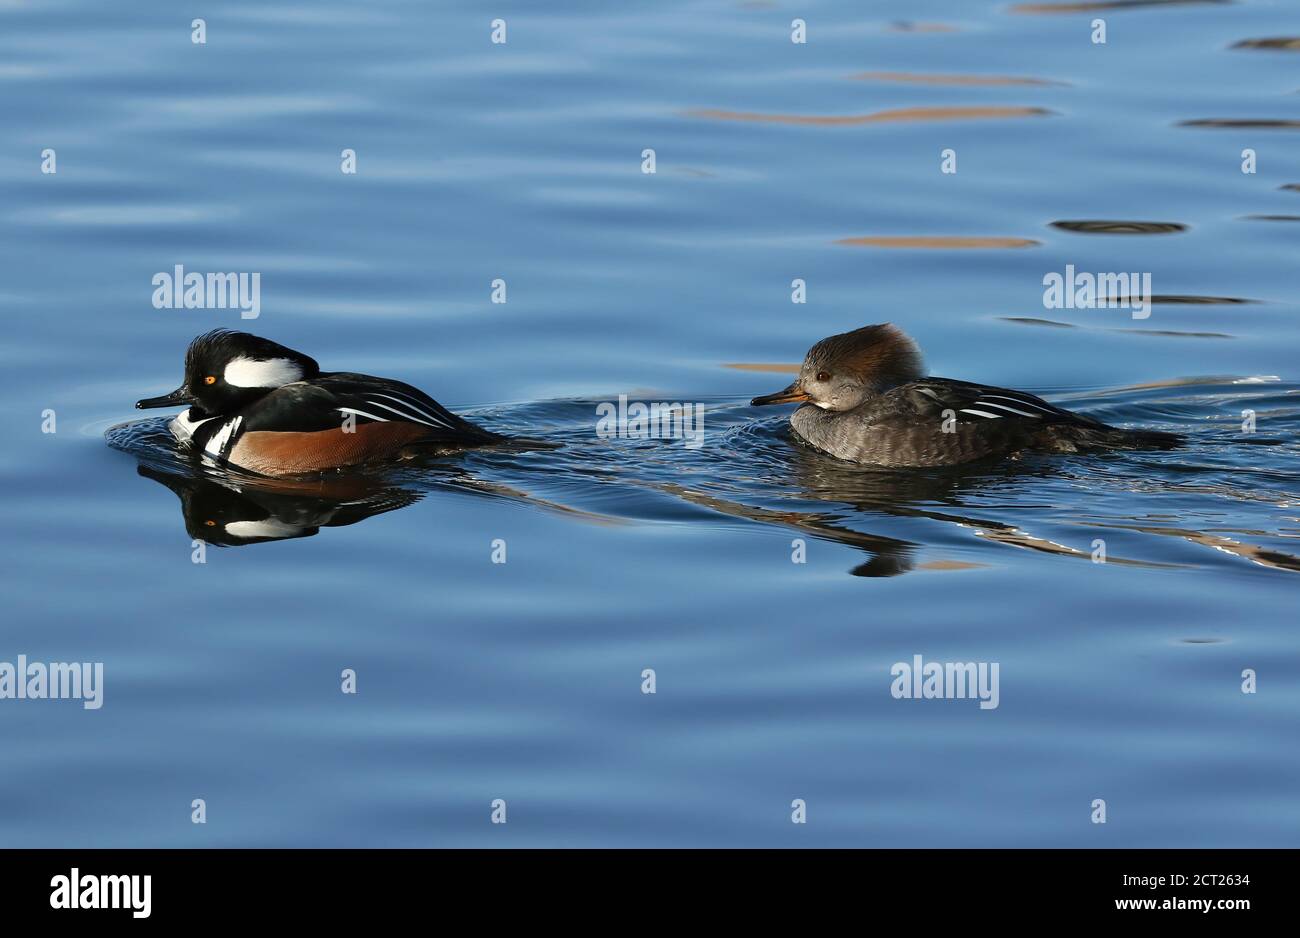 A Hooded Merganser couple swim by at close range in a blue lake with softly undulating waves in January in Colorado. Stock Photo